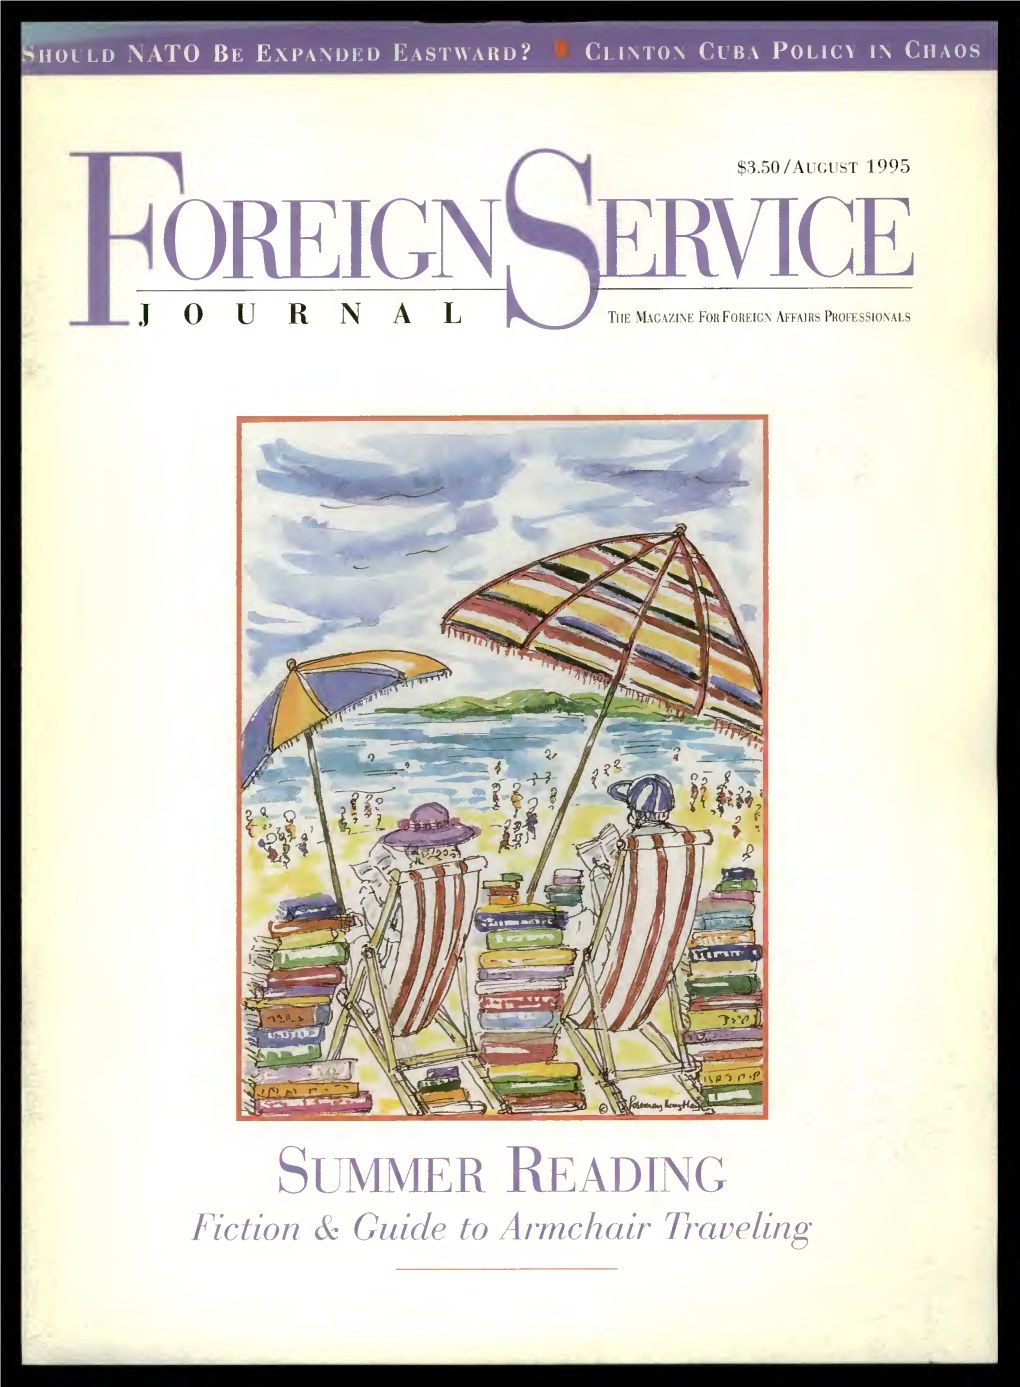 The Foreign Service Journal, August 1995